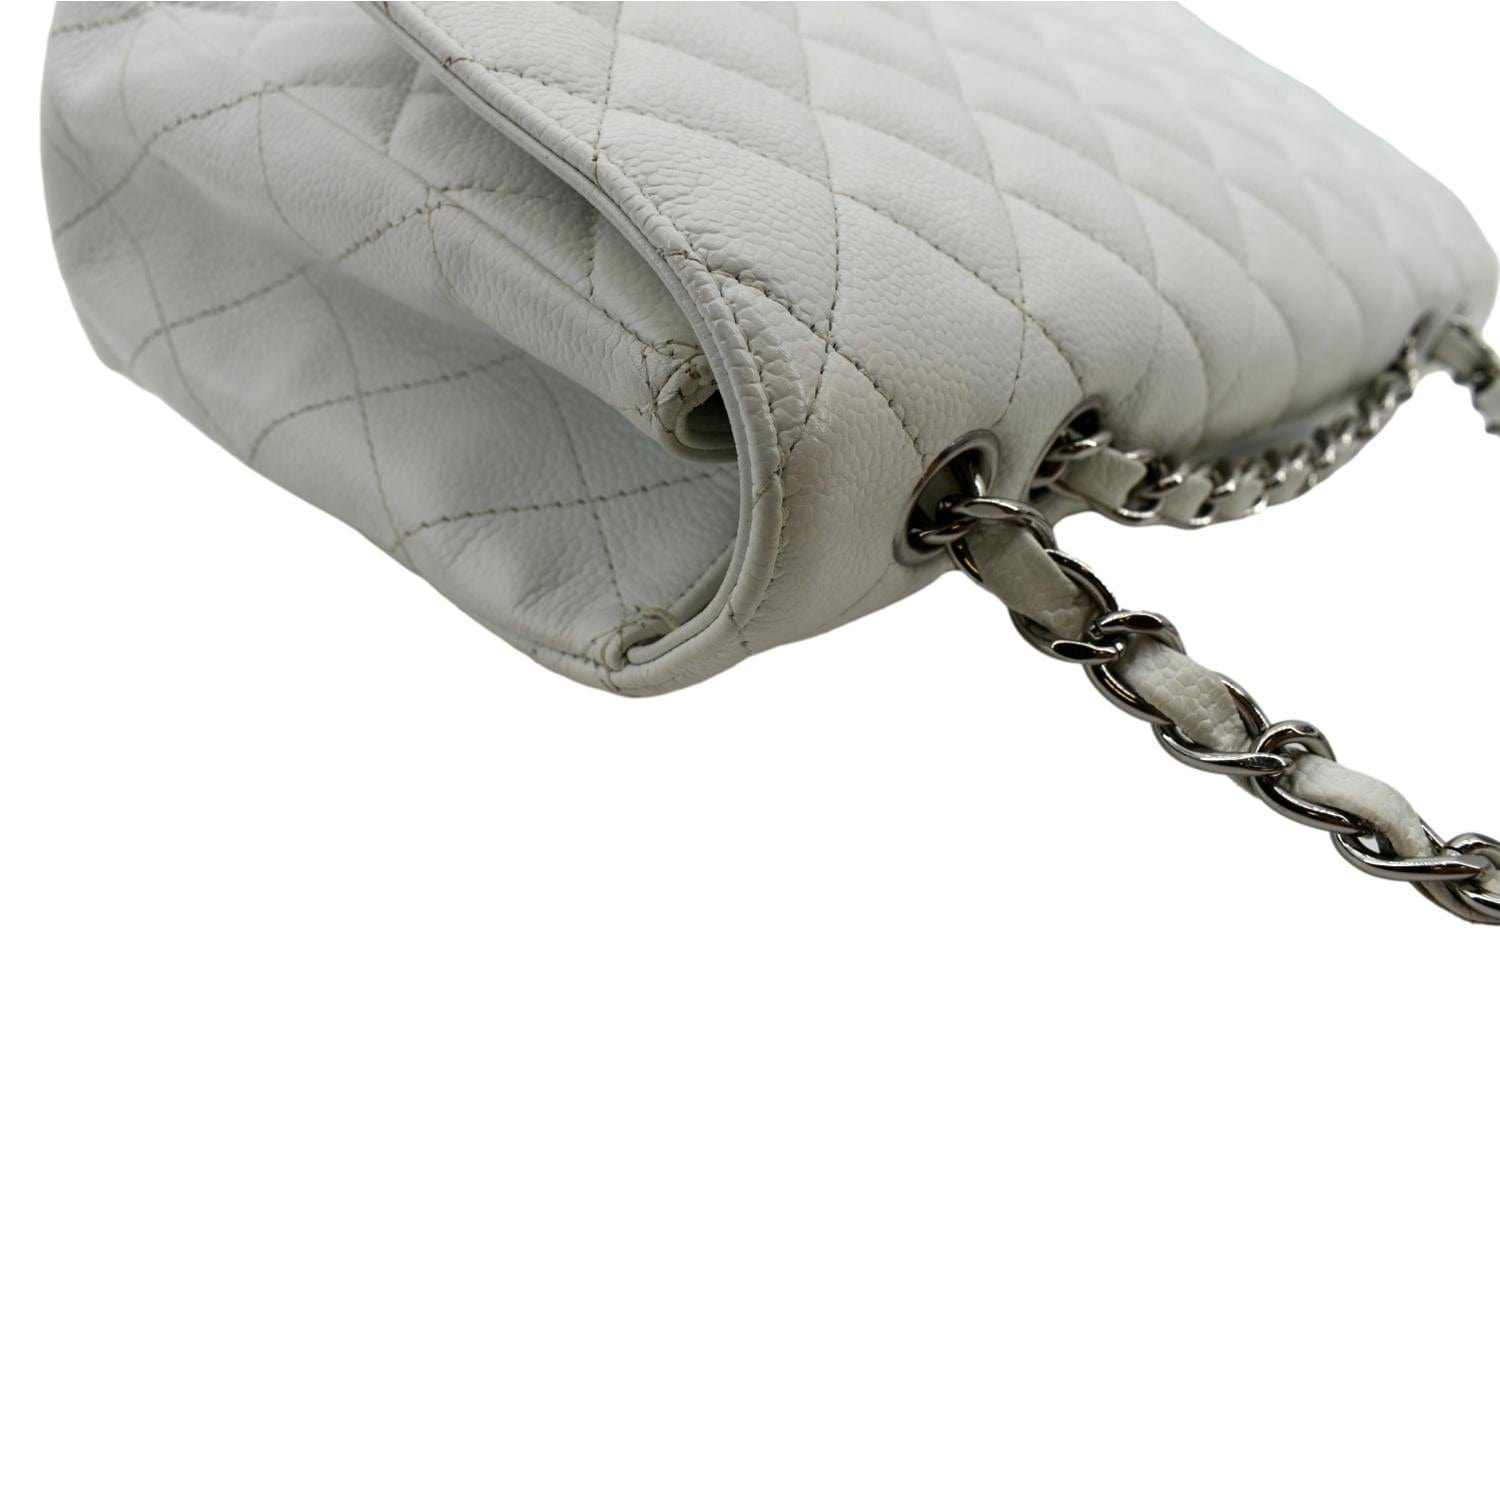 CHANEL Classic Jumbo Flap Caviar Leather Shoulder Bag White - Hot Deal